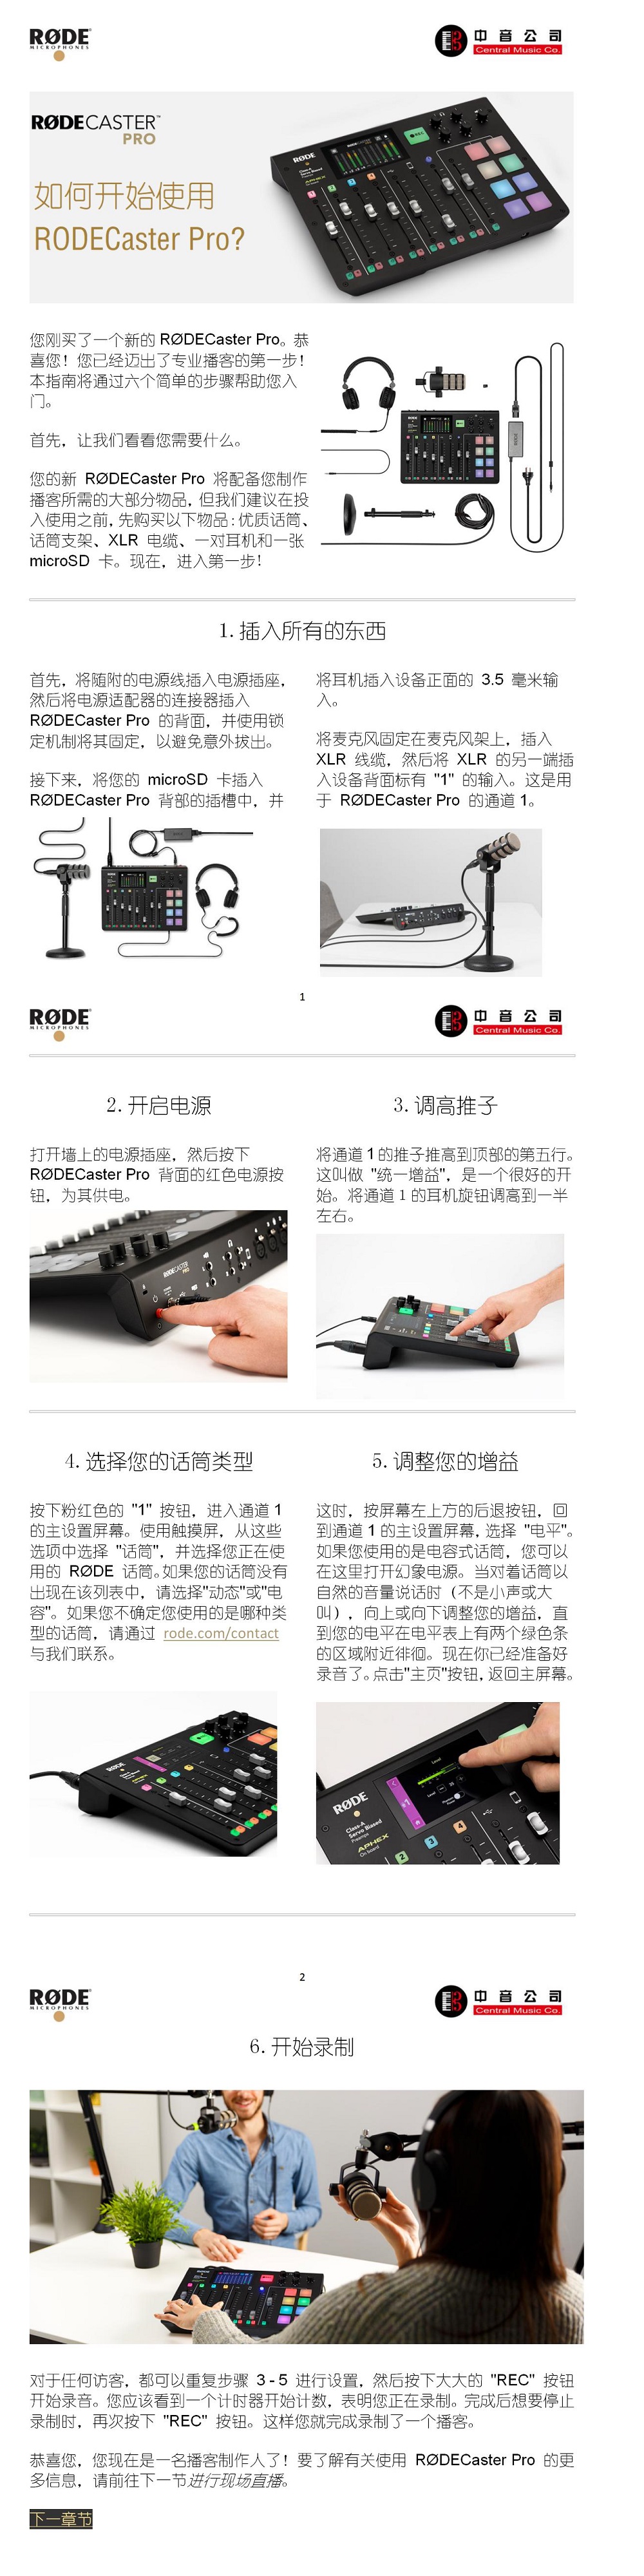 01_CasterPro Hub_How to Get Started with the RØDECaster Pro - 副本.jpg